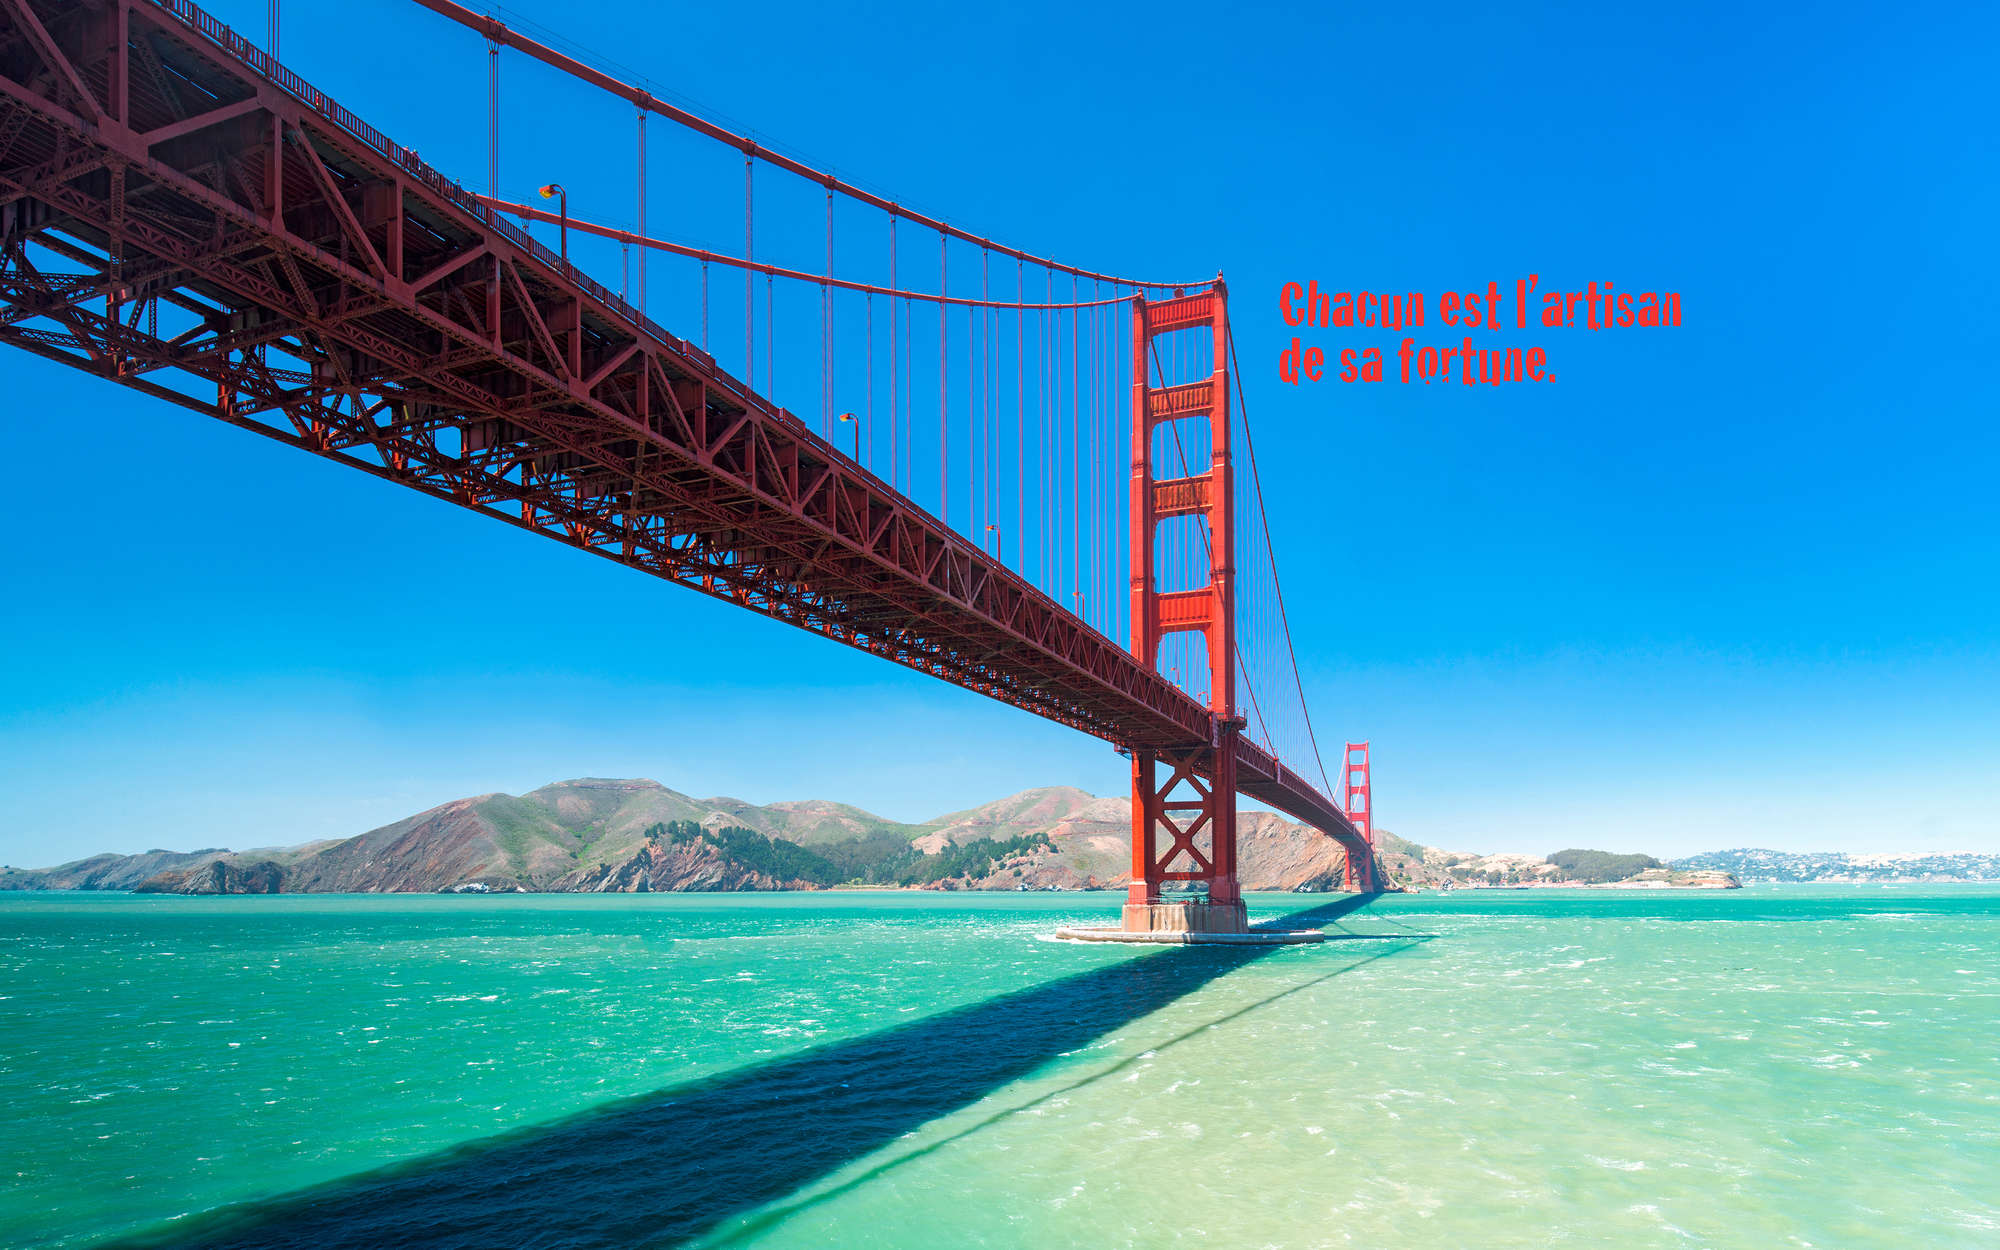             Golden Gate Bridge mural with lettering in French - Premium smooth non-woven
        